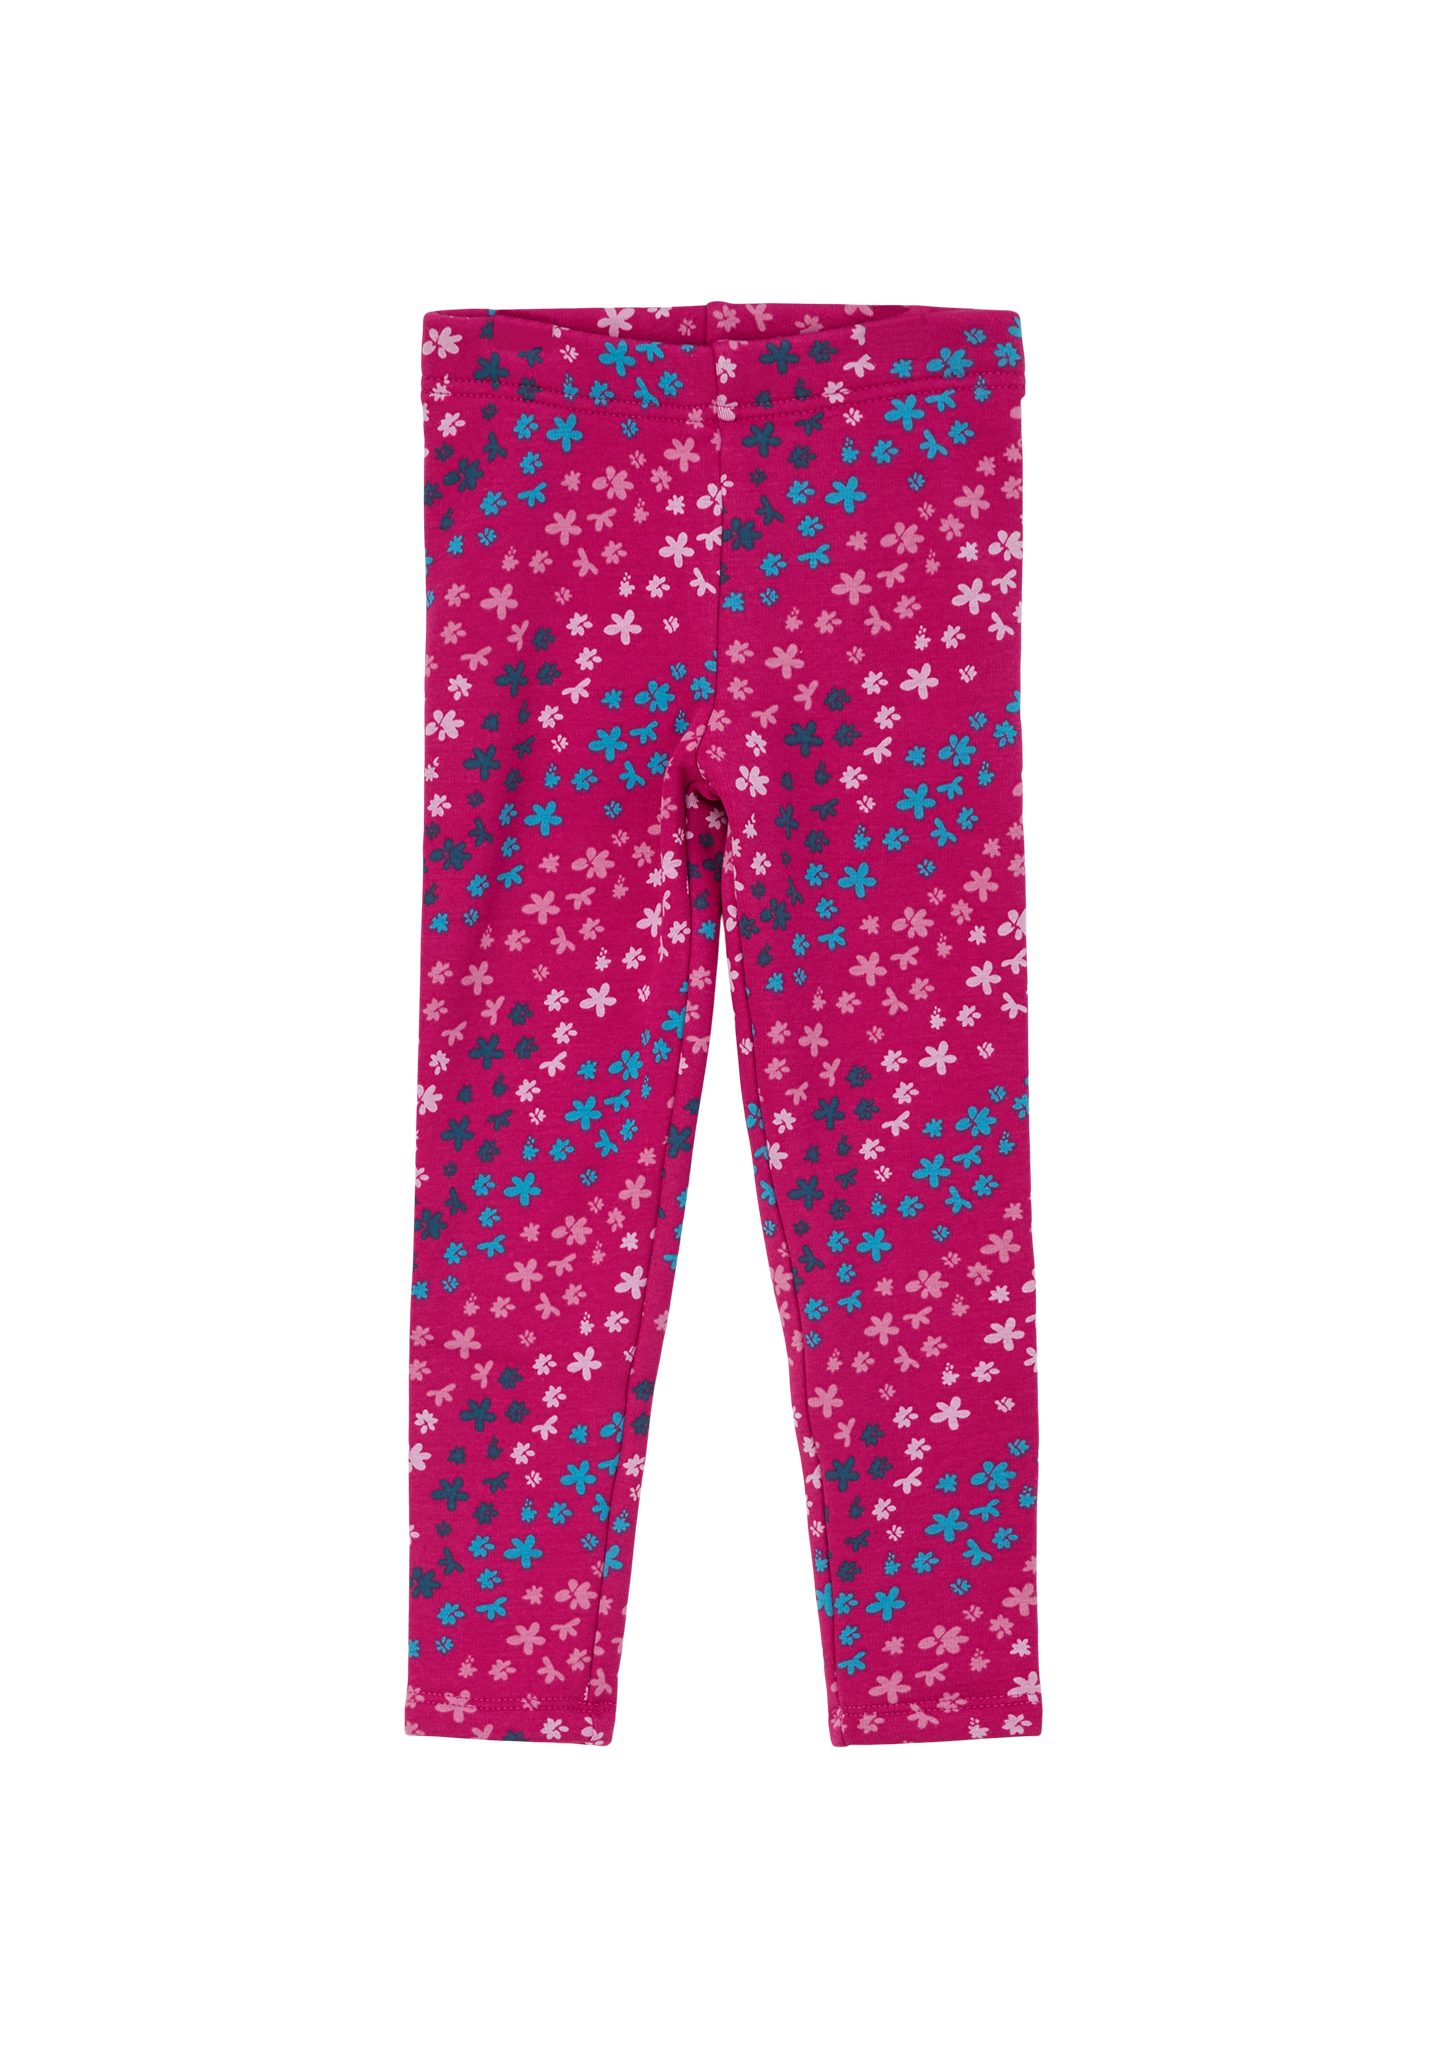 Leggings mit Thermofleece-Futter s.Oliver Leggings pink